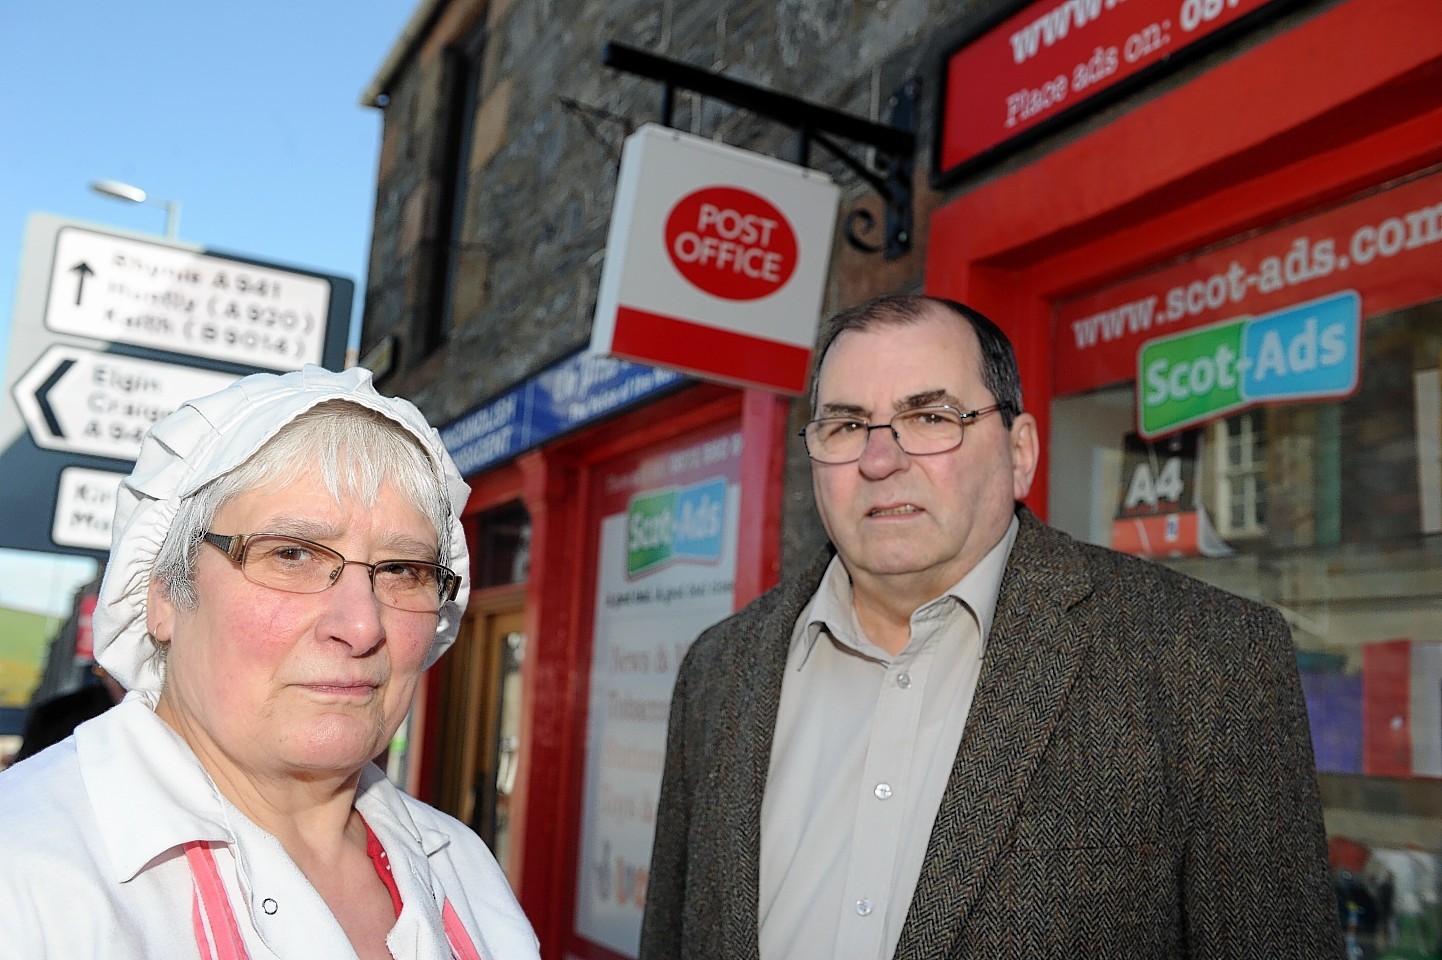 Bunty Campbell, chairman of Dufftown Community Council, and Moray councillor Mike McConnachie at Dufftown Post Office